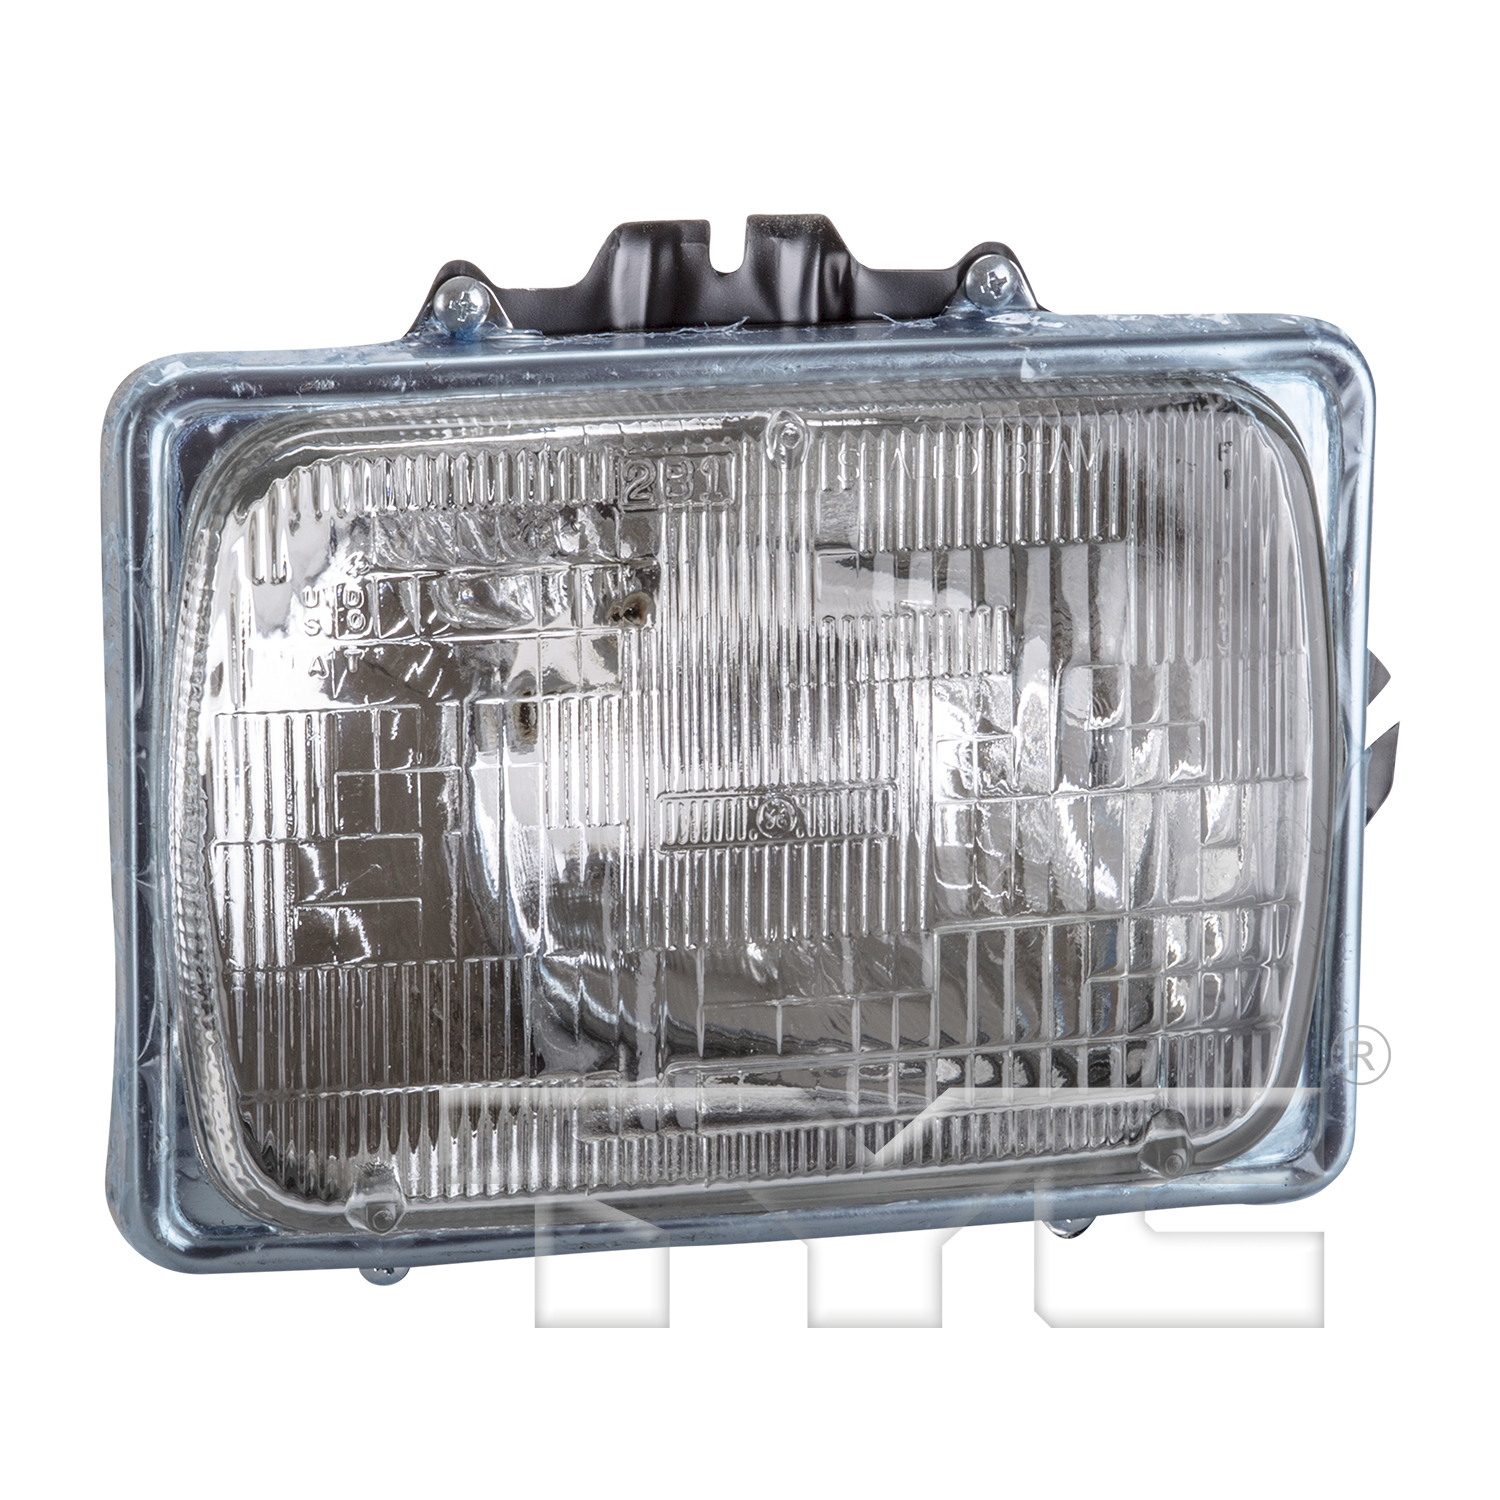 Aftermarket HEADLIGHTS for FORD - E-350 SUPER DUTY, E-350 SUPER DUTY,99-07,RT Headlamp assy sealed beam